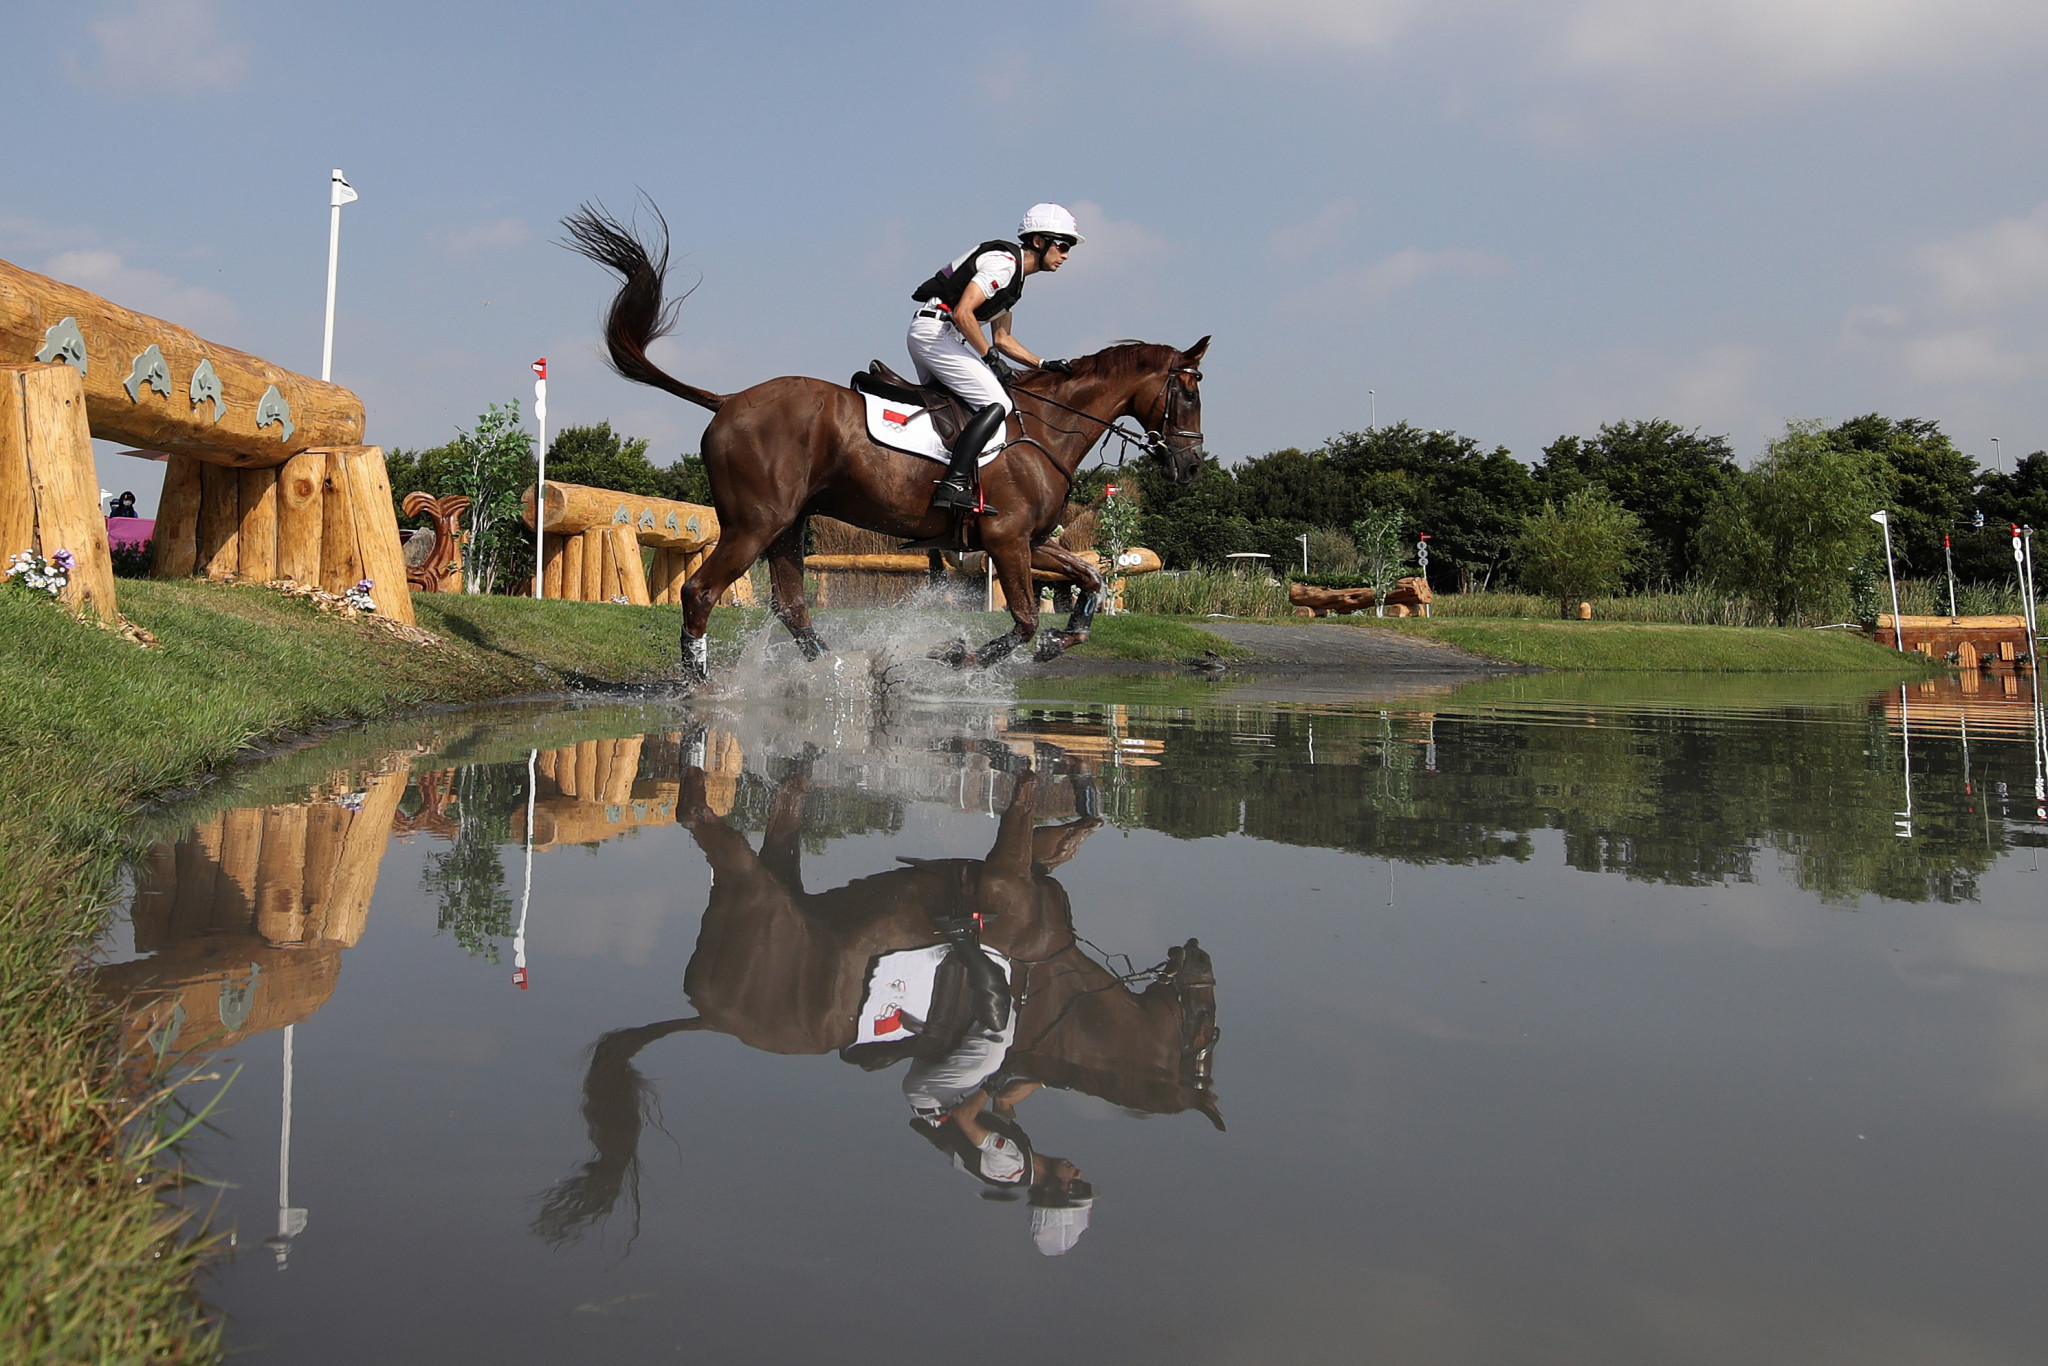 Alex Hua Tin won eventing silver at the 2014 Asian Games, bronze in 2018 and was a member of China's first Olympic team in the discipline ©Getty Images